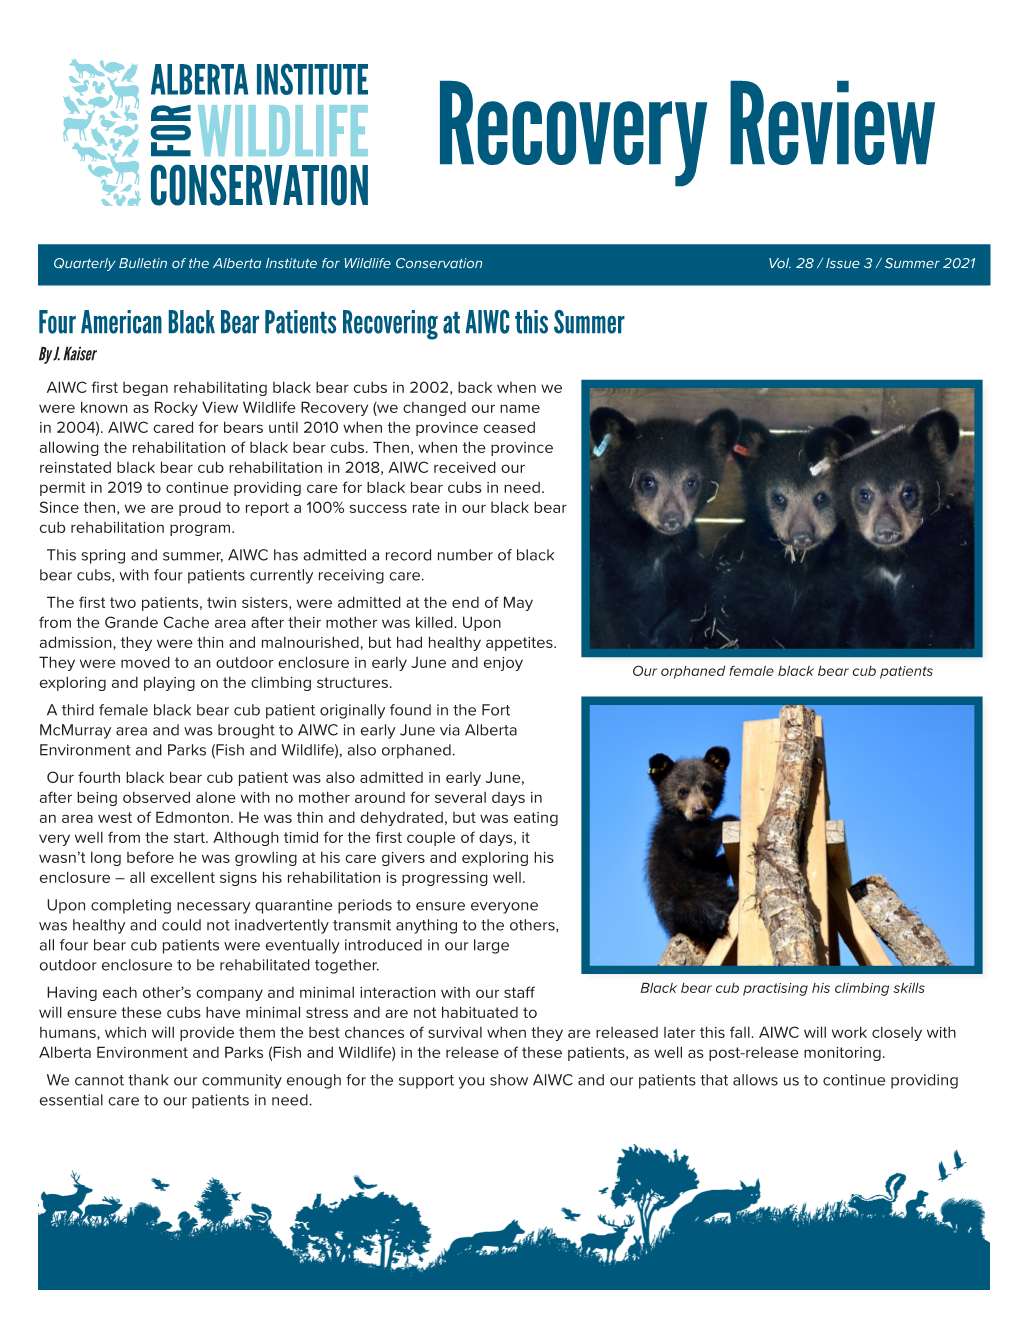 Four American Black Bear Patients Recovering at AIWC This Summer by J